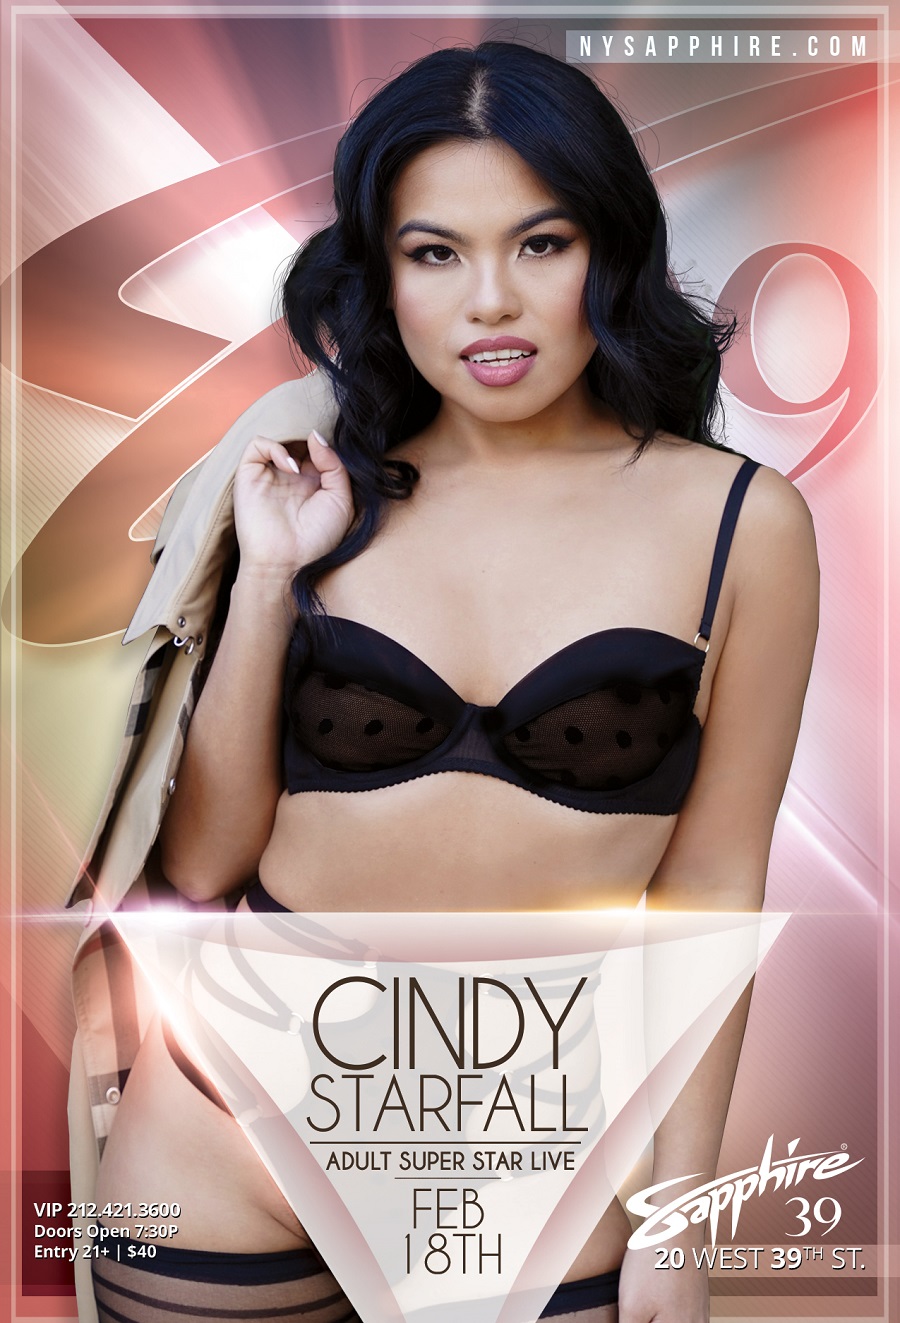 Cindy Starfall to Headline Sapphire Gentlemen’s Club in NYC for One Night Only Show Feb. 18th